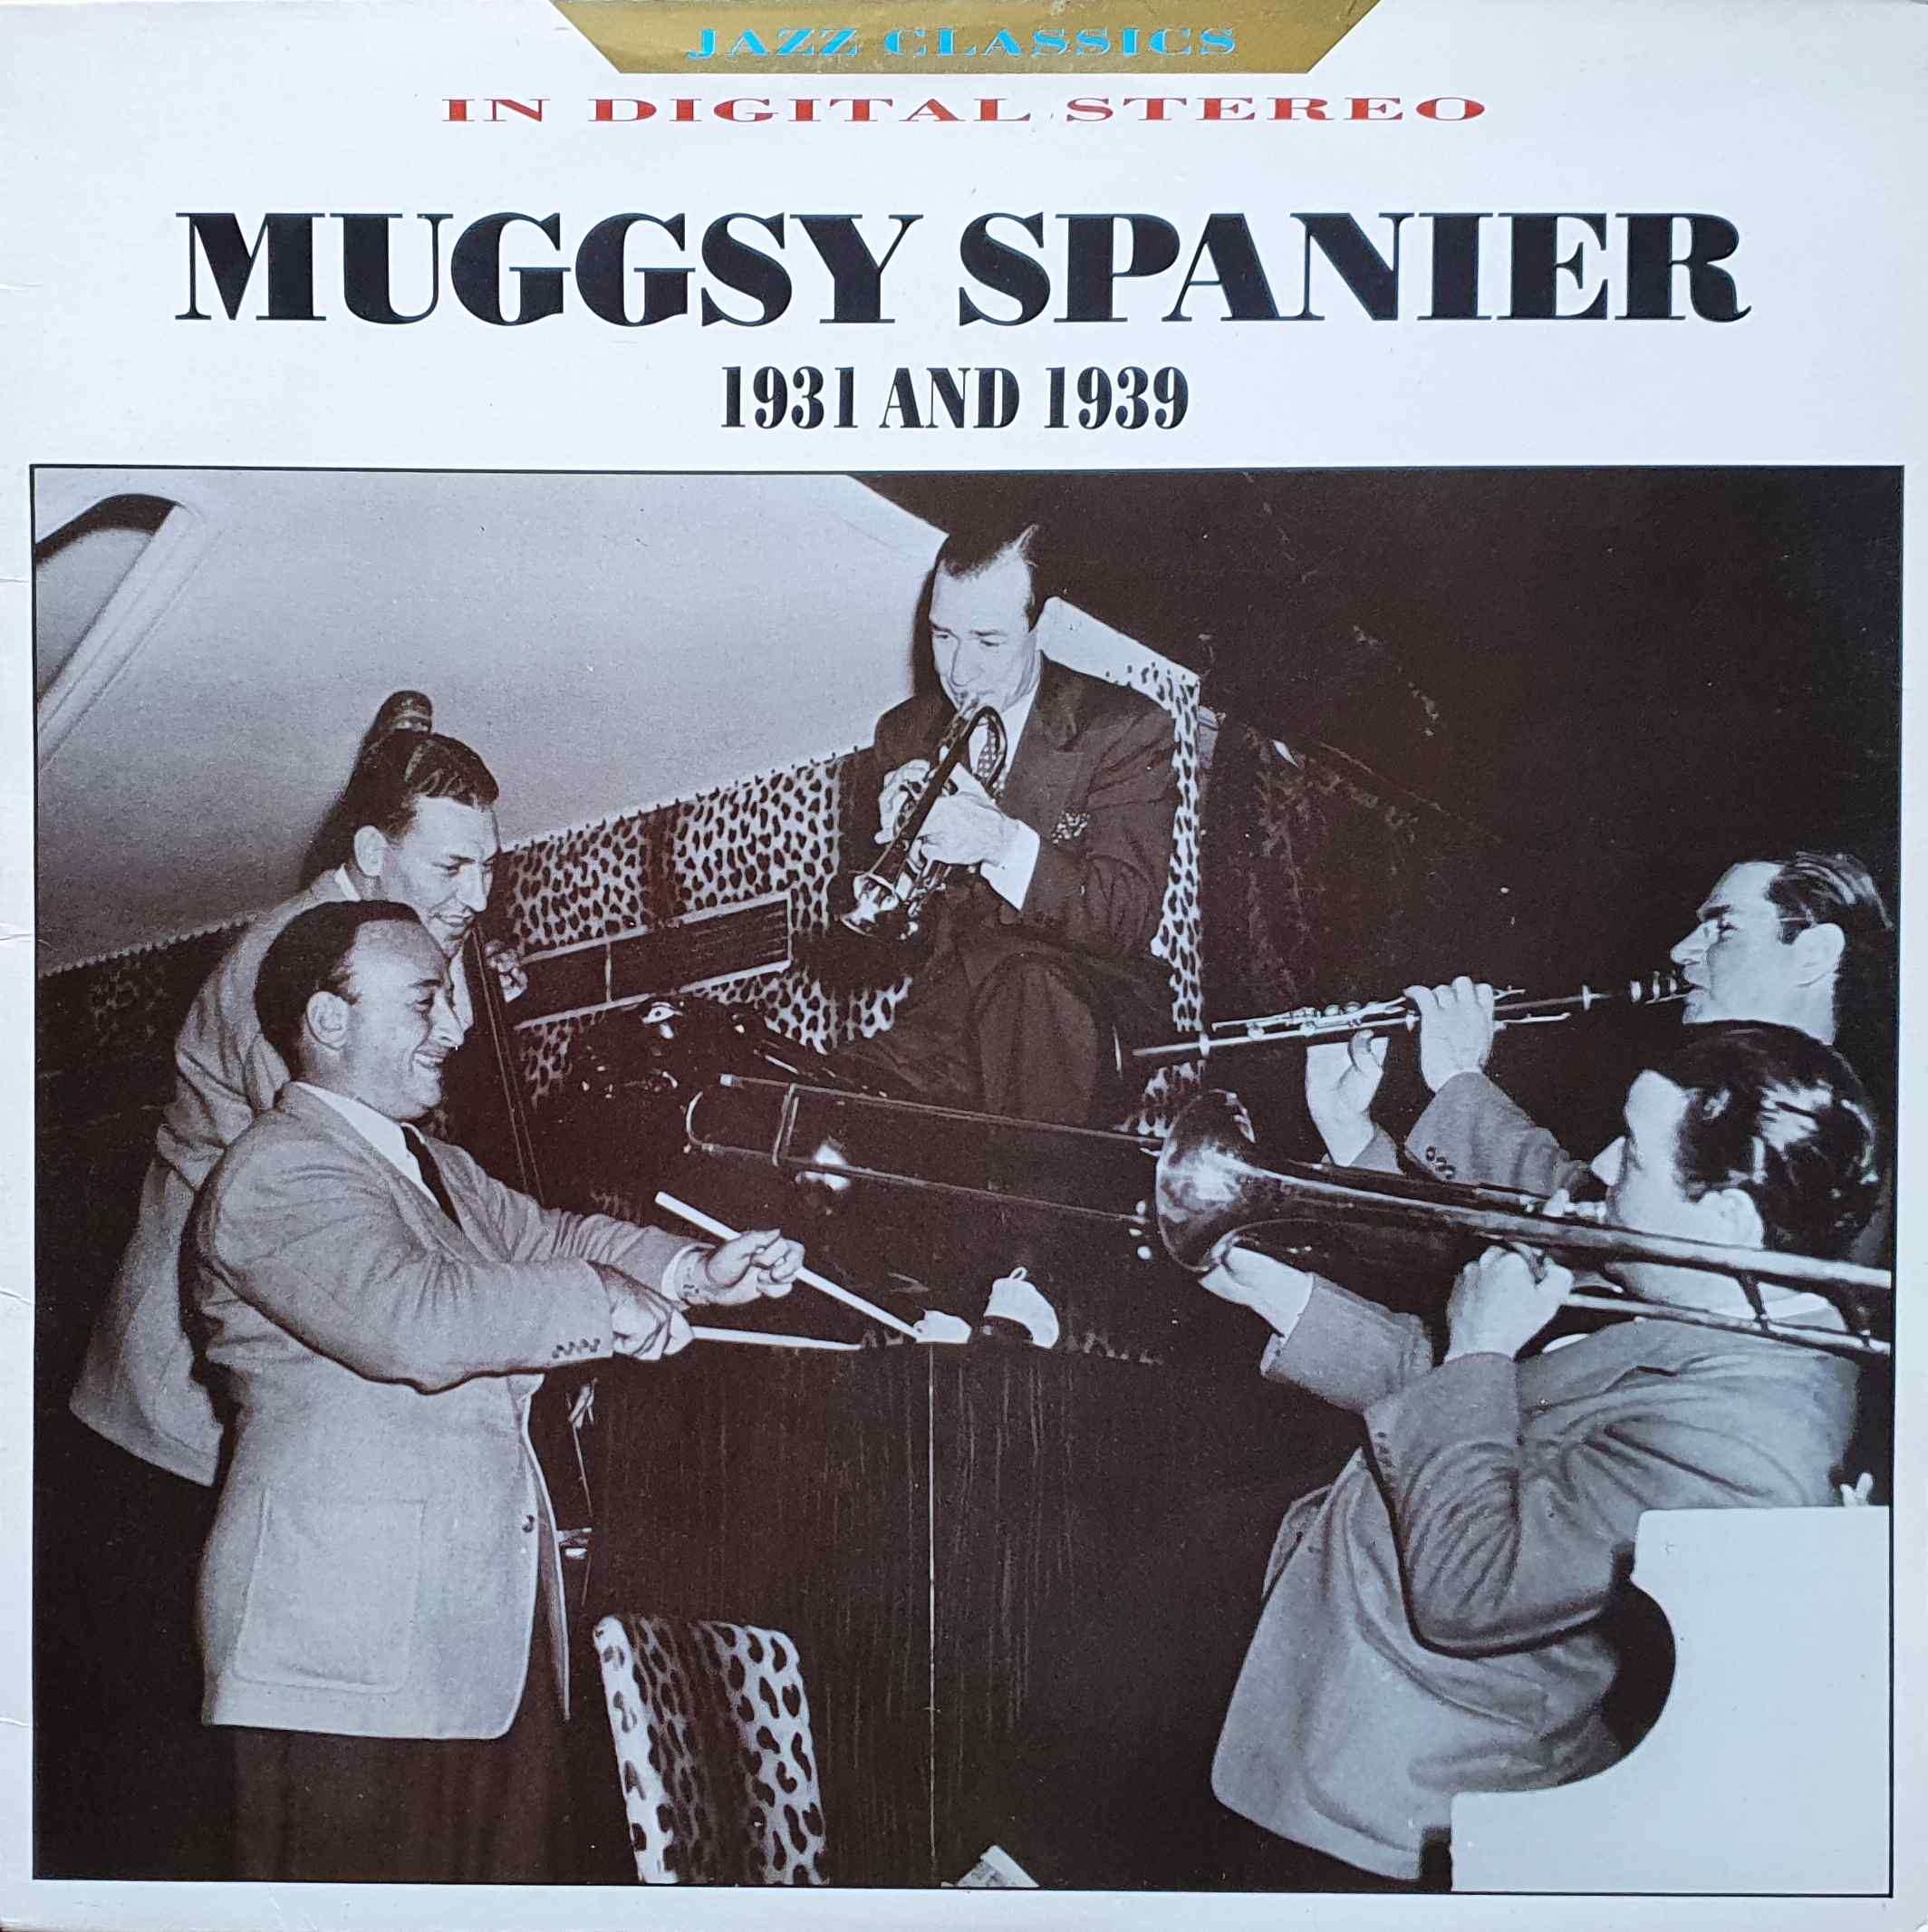 Picture of REB 687 Jazz classics - Muggsy Spanier by artist Muggsy Spanier from the BBC albums - Records and Tapes library